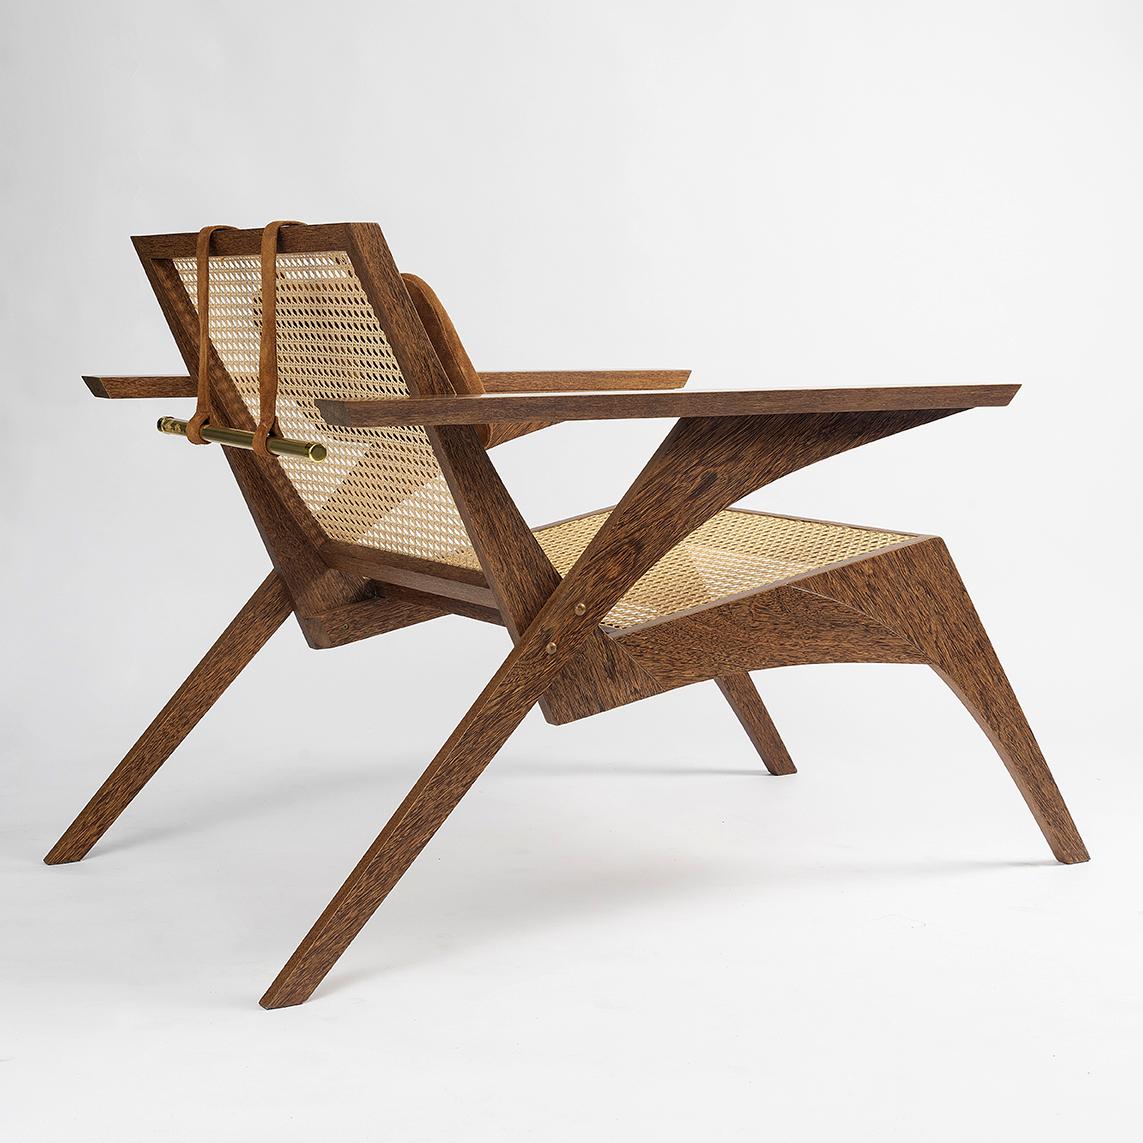 Contemporary Pierre Armchair by Tiago Curioni in Sucupira Brazilian Hard Wood and Straw For Sale